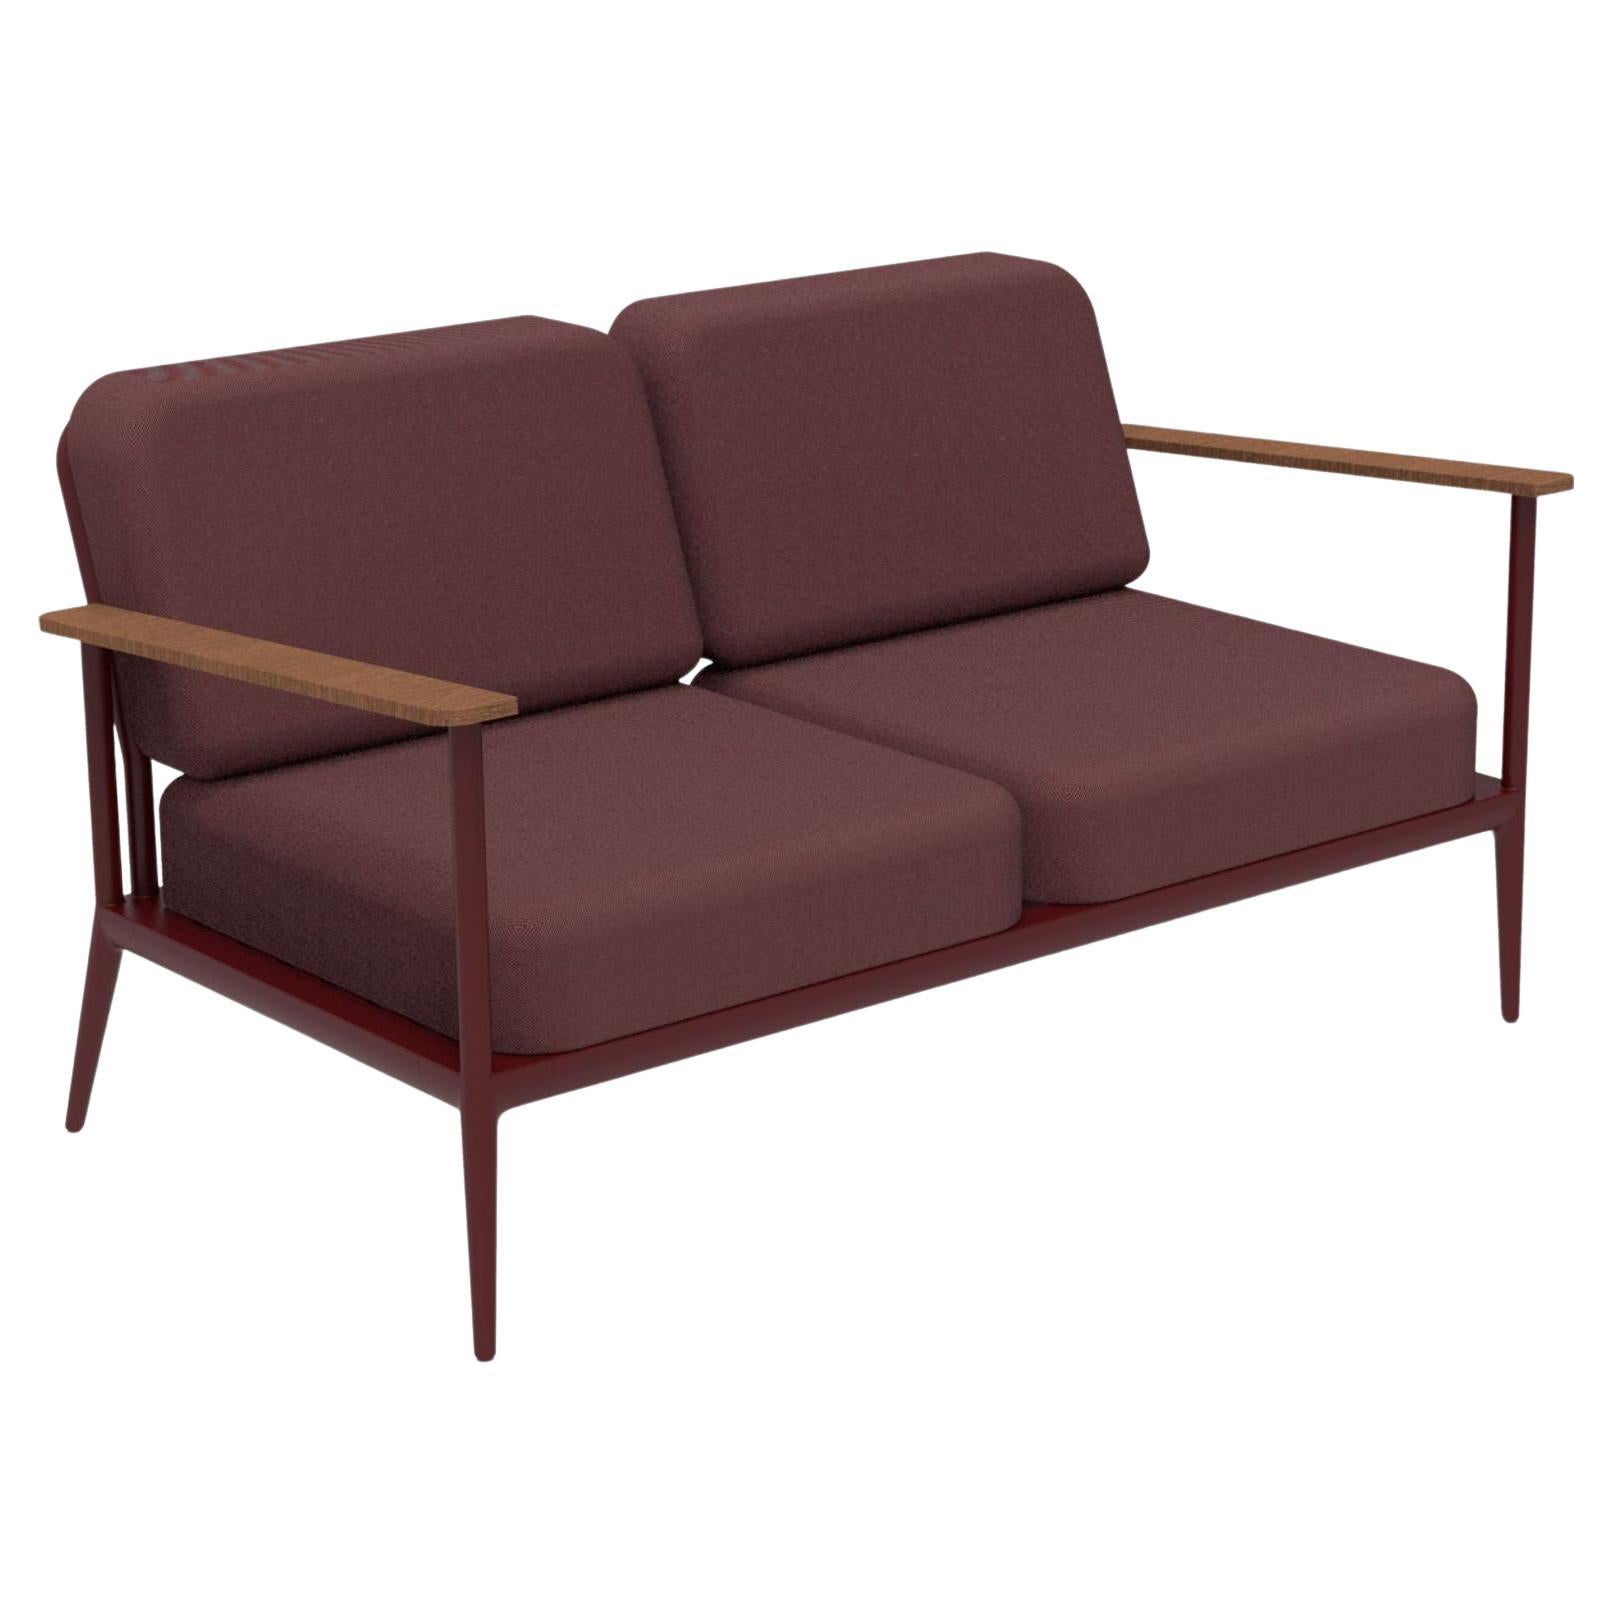 Nature Burgundy Sofa by Mowee For Sale